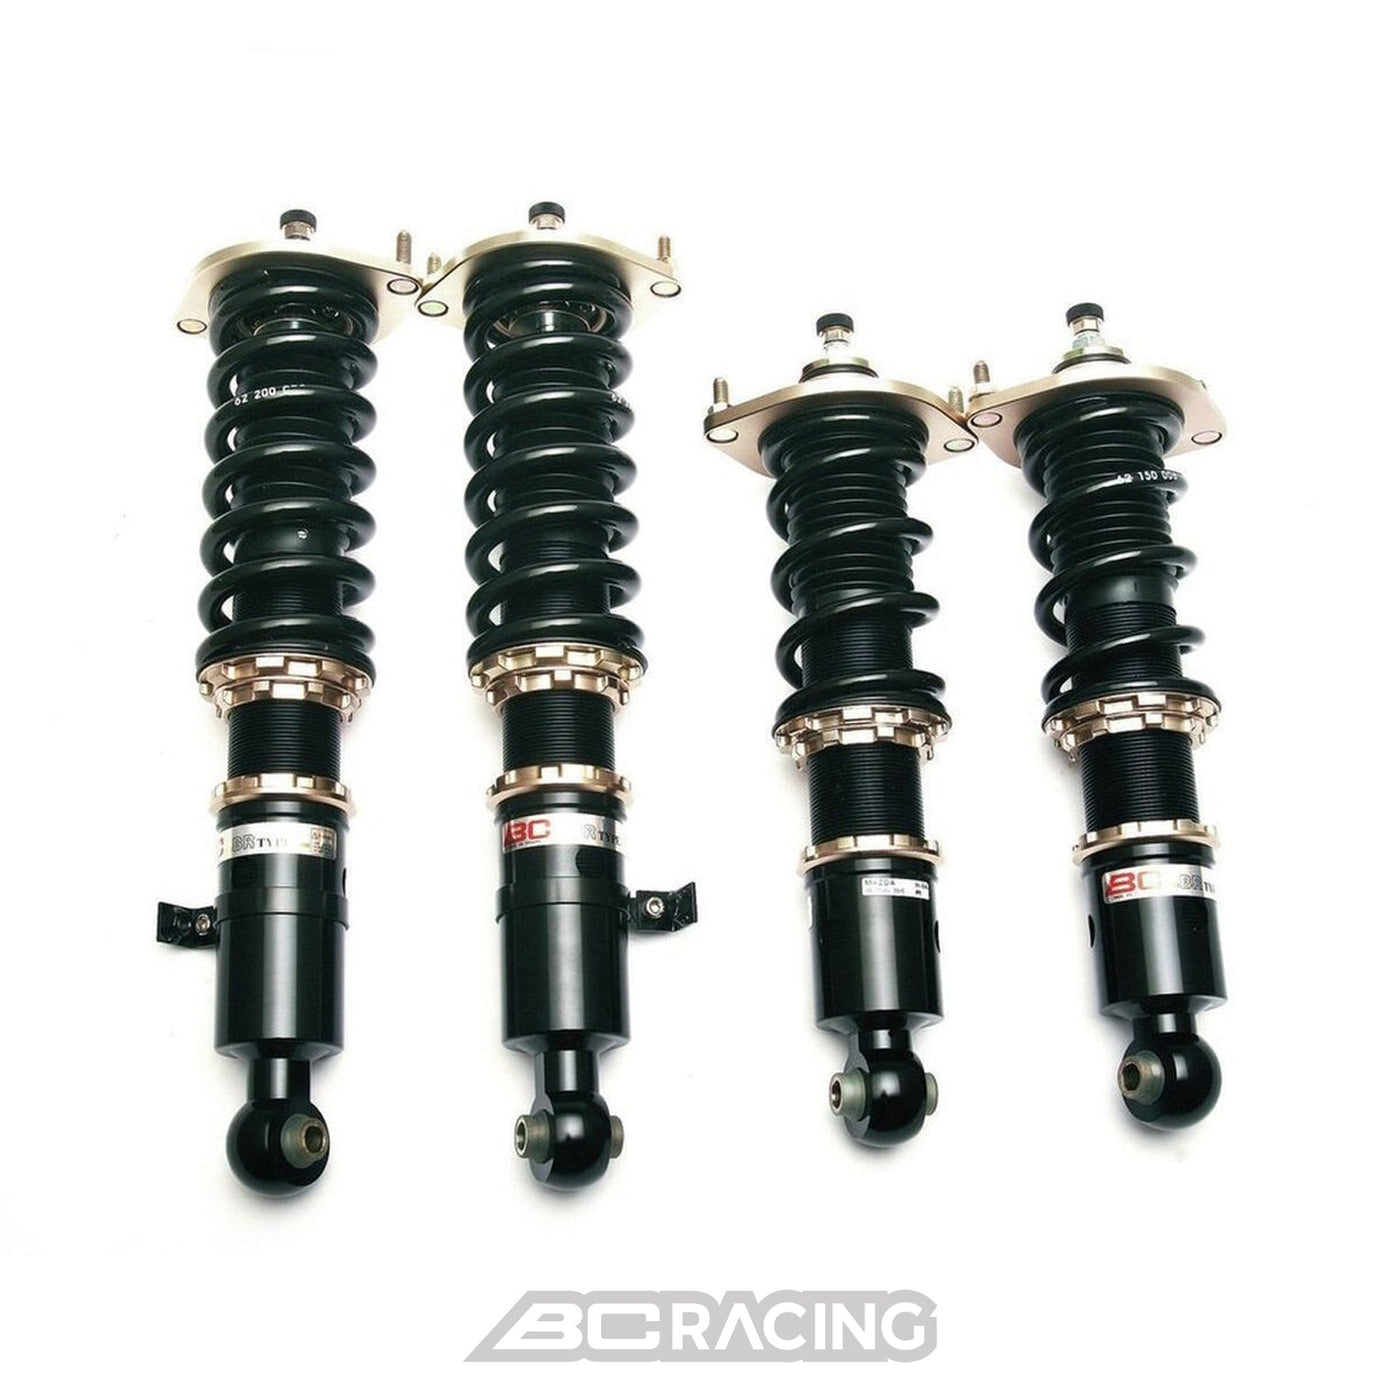 BC Racing Coilovers 2013-2017 HONDA Accord (P/N Replaced With A-103)